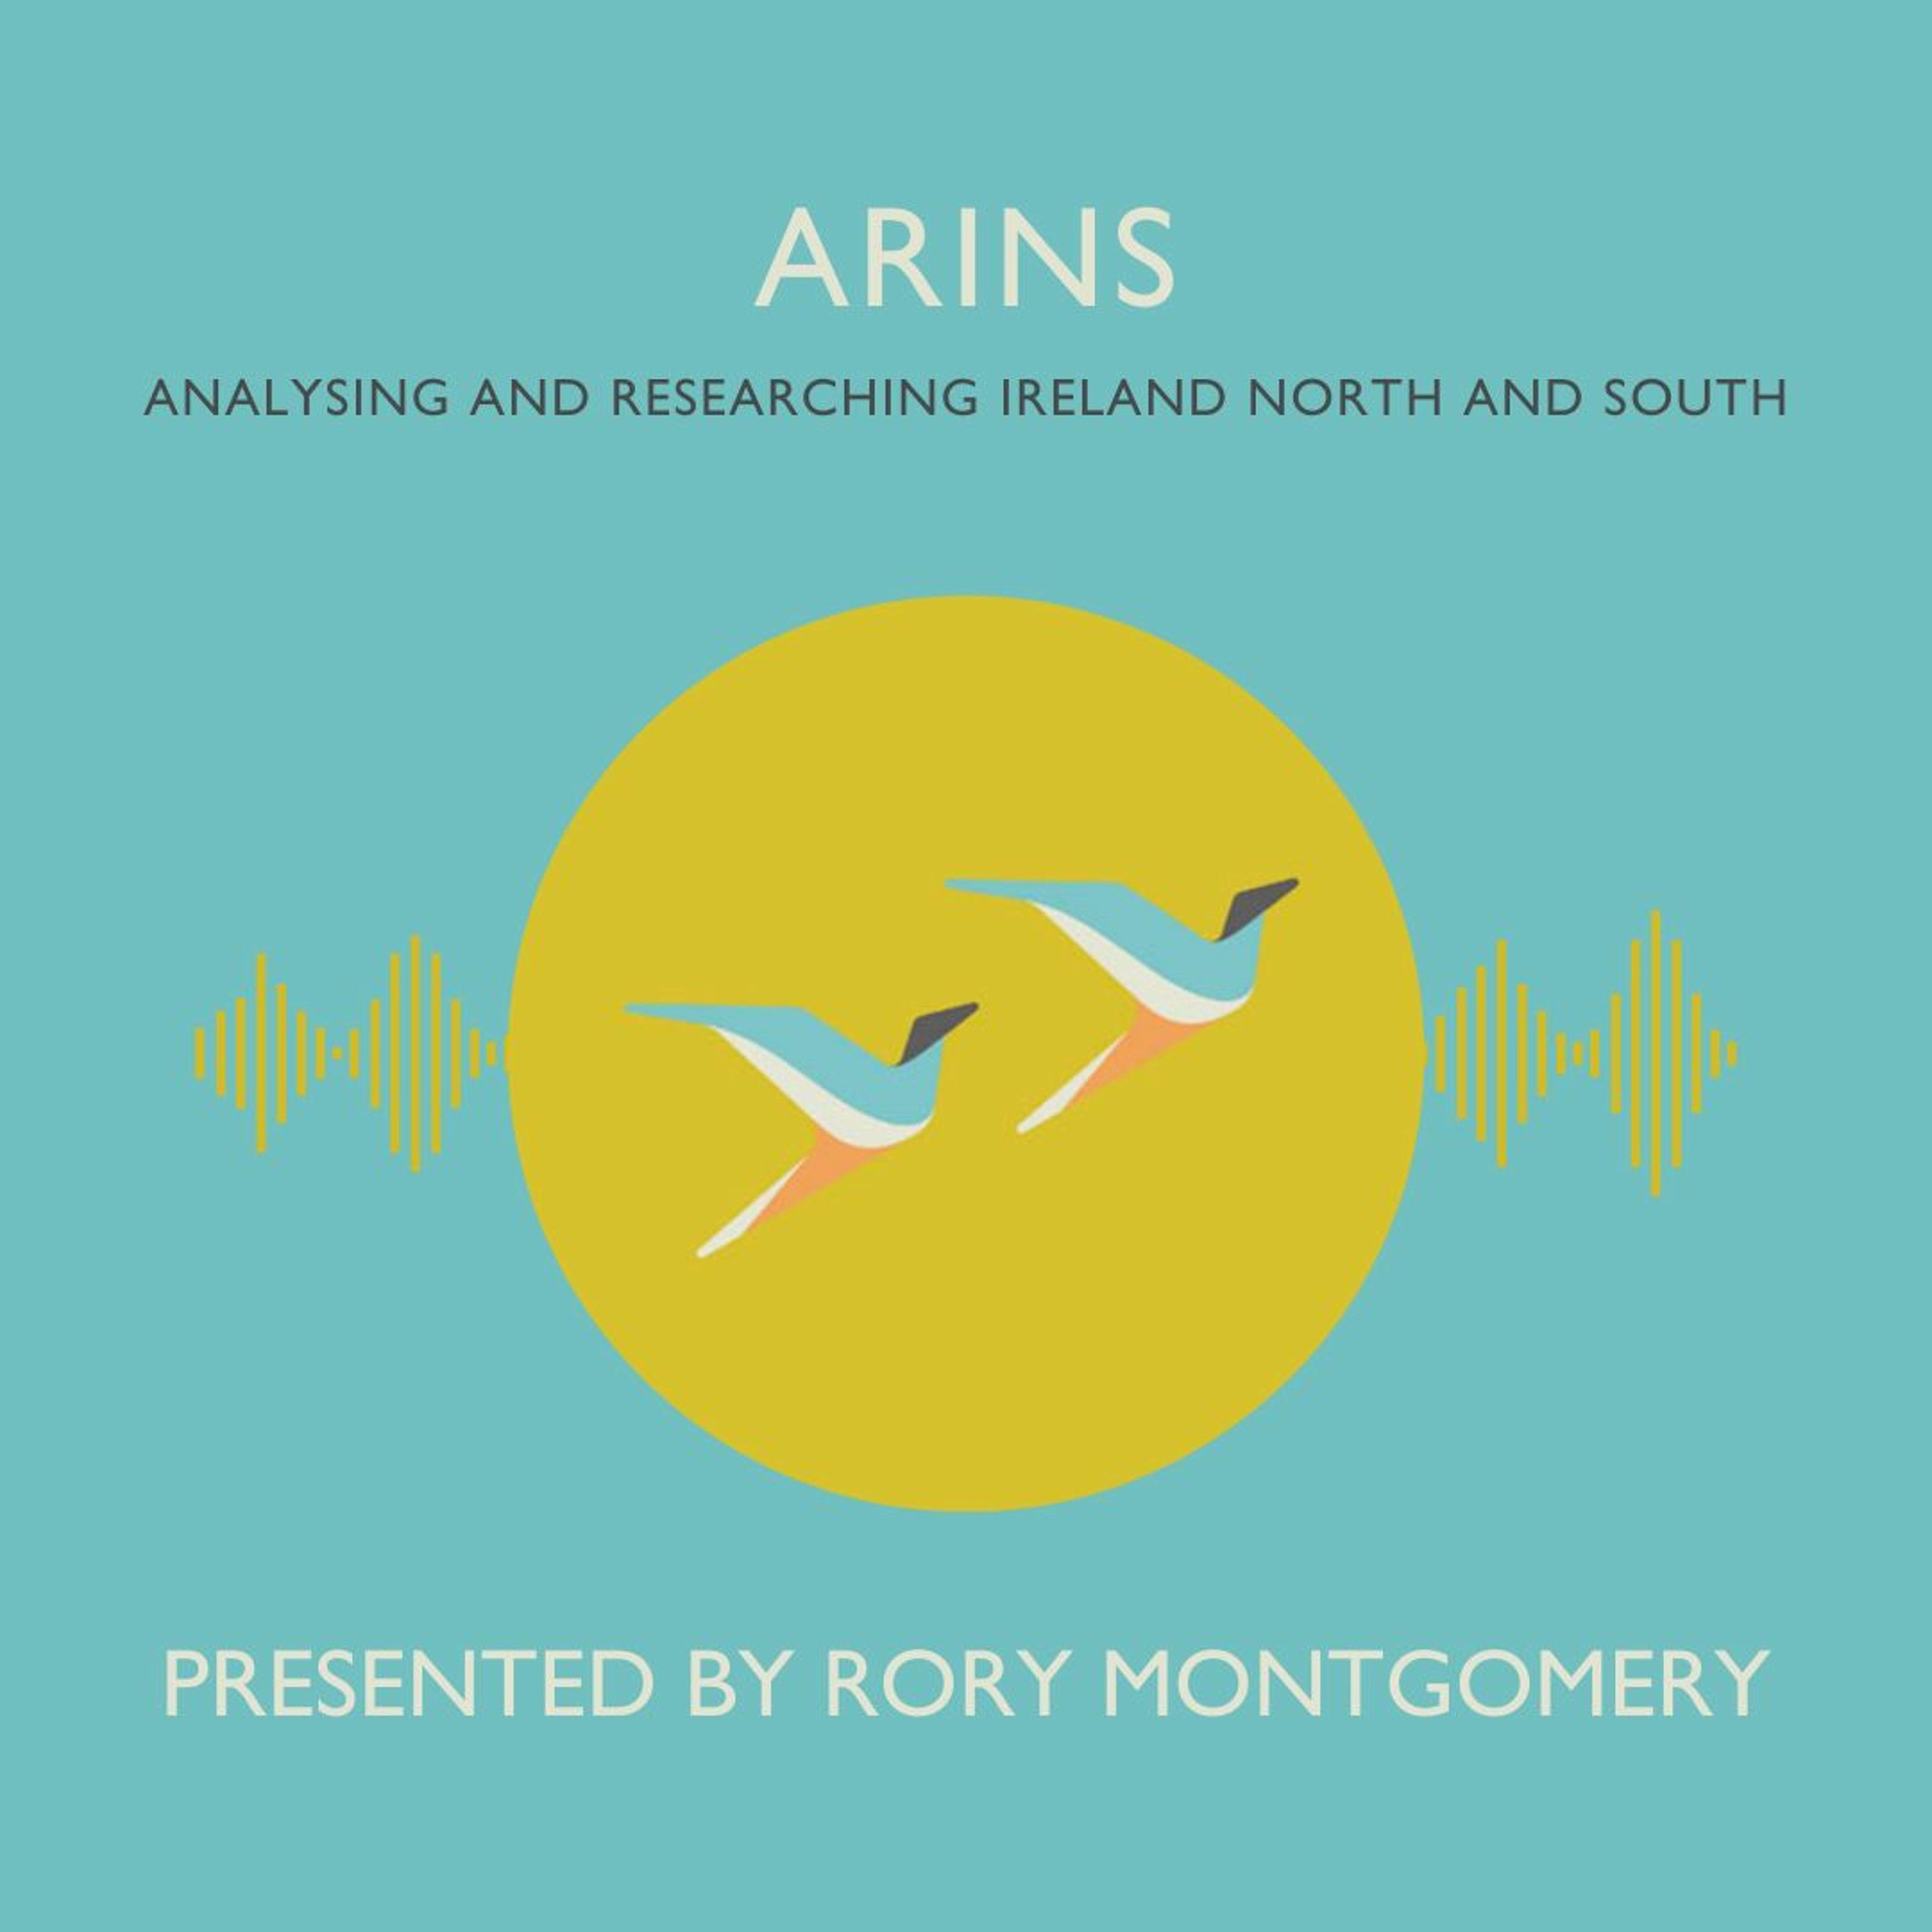 ARINS: Measuring Cross-Border Differences on the Island of Ireland